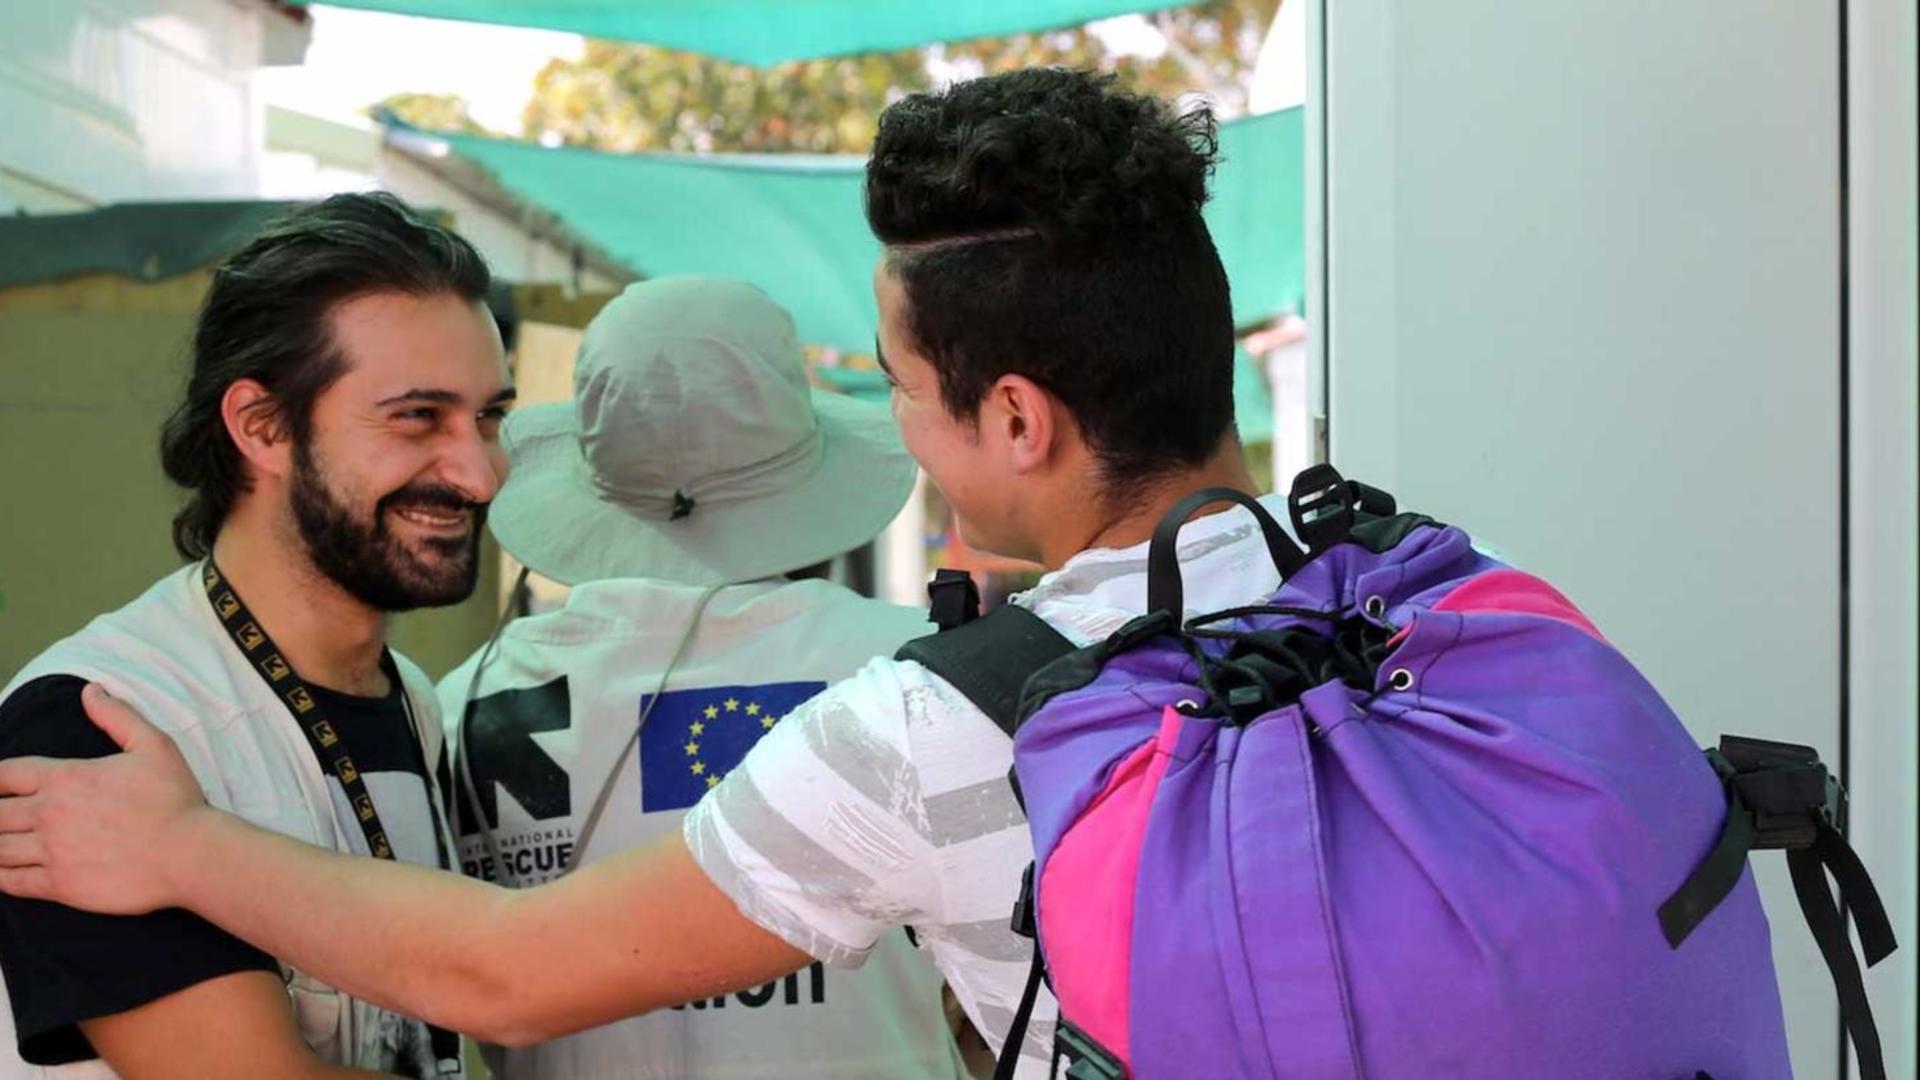 A young refugee in Greece says goodbye to an IRC aid worker as he leaves the camp to be reunited with relatives.